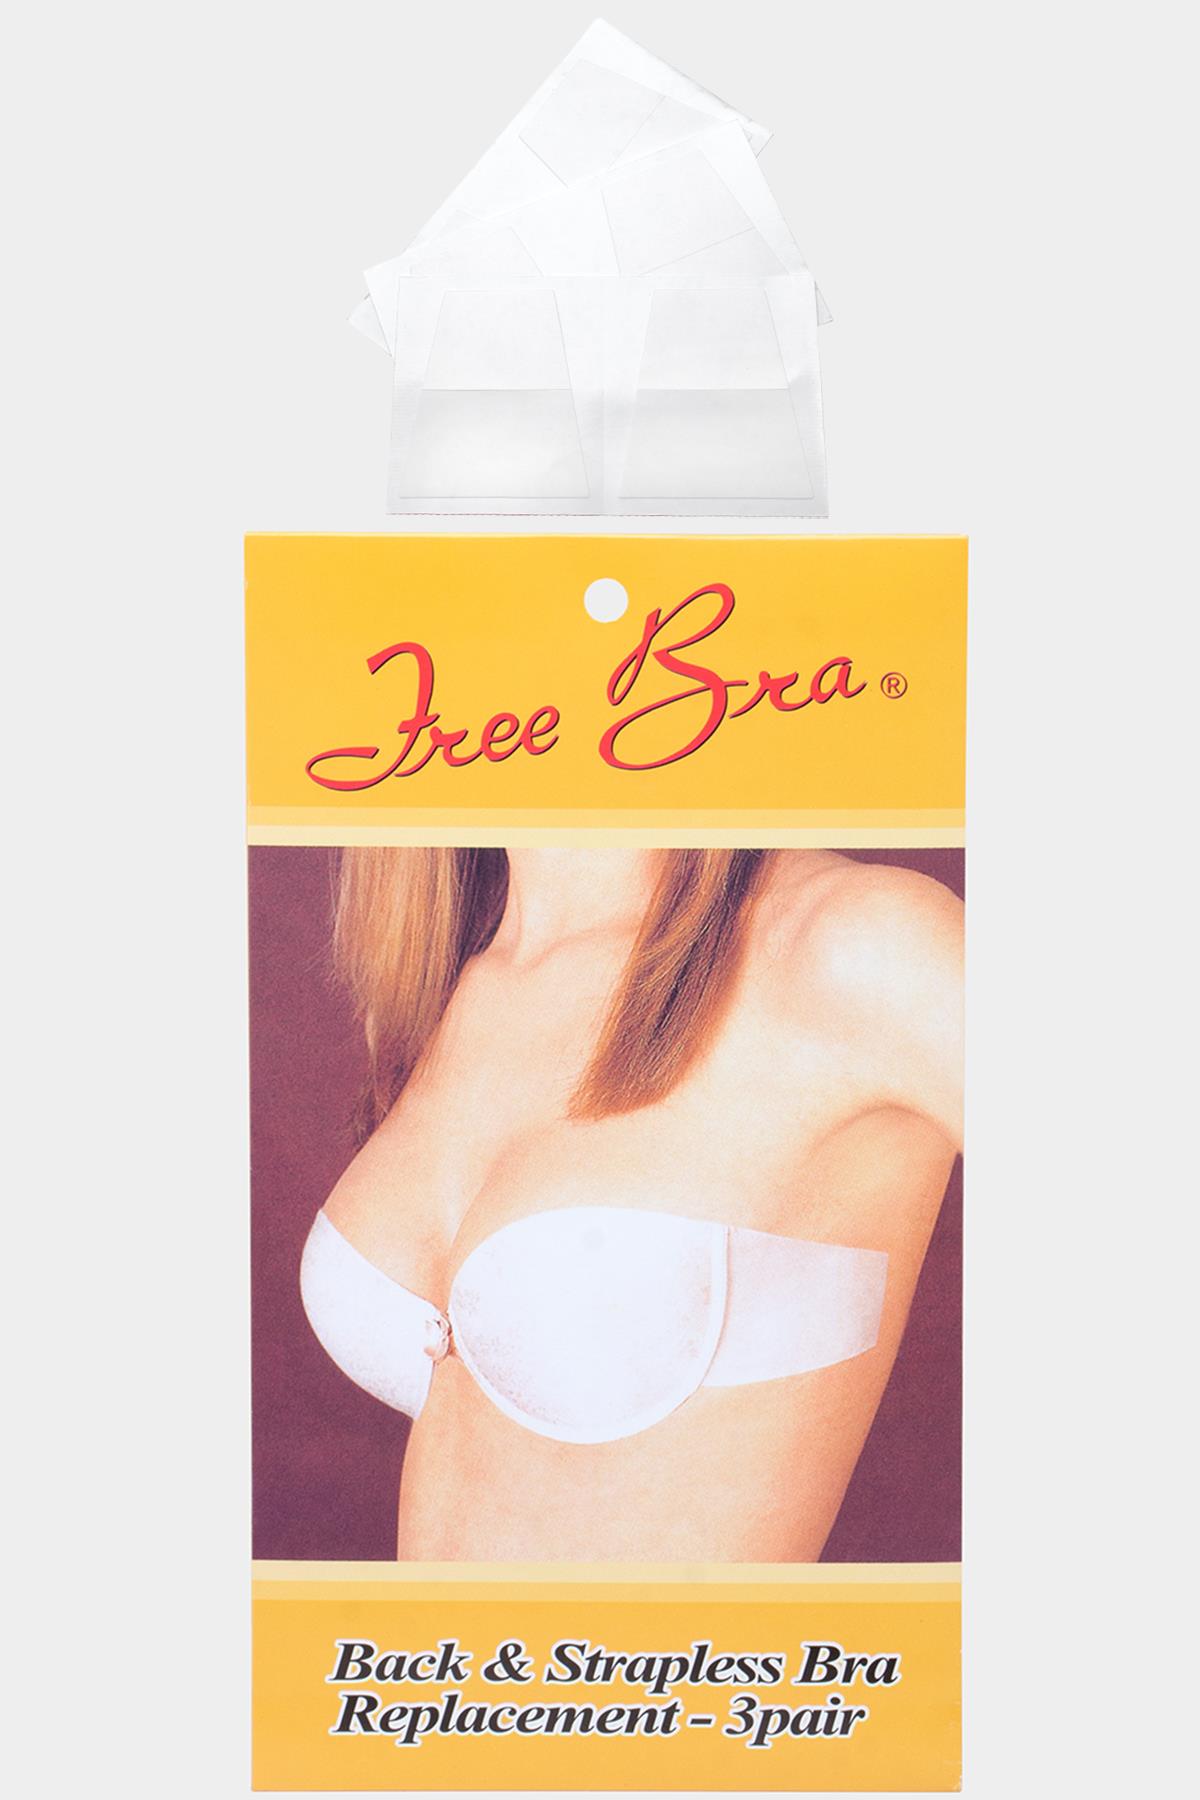 FREE BRA BACK AND STRAPLESS BRA REPLACEMENT 3 PAIR SET